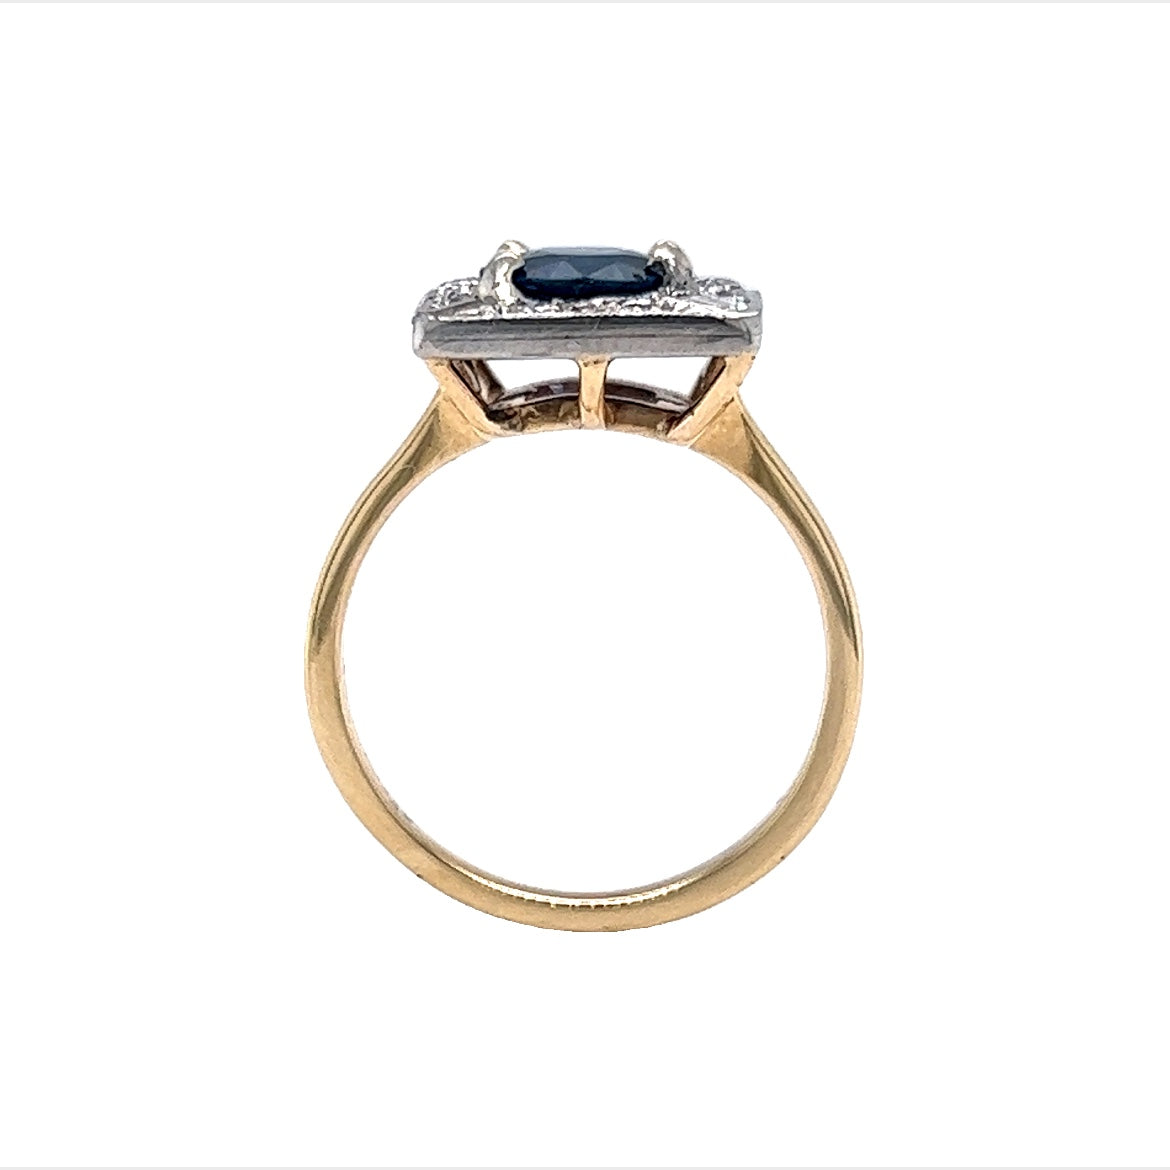 Vintage Two Toned Sapphire & Diamond Ring in 14k Gold